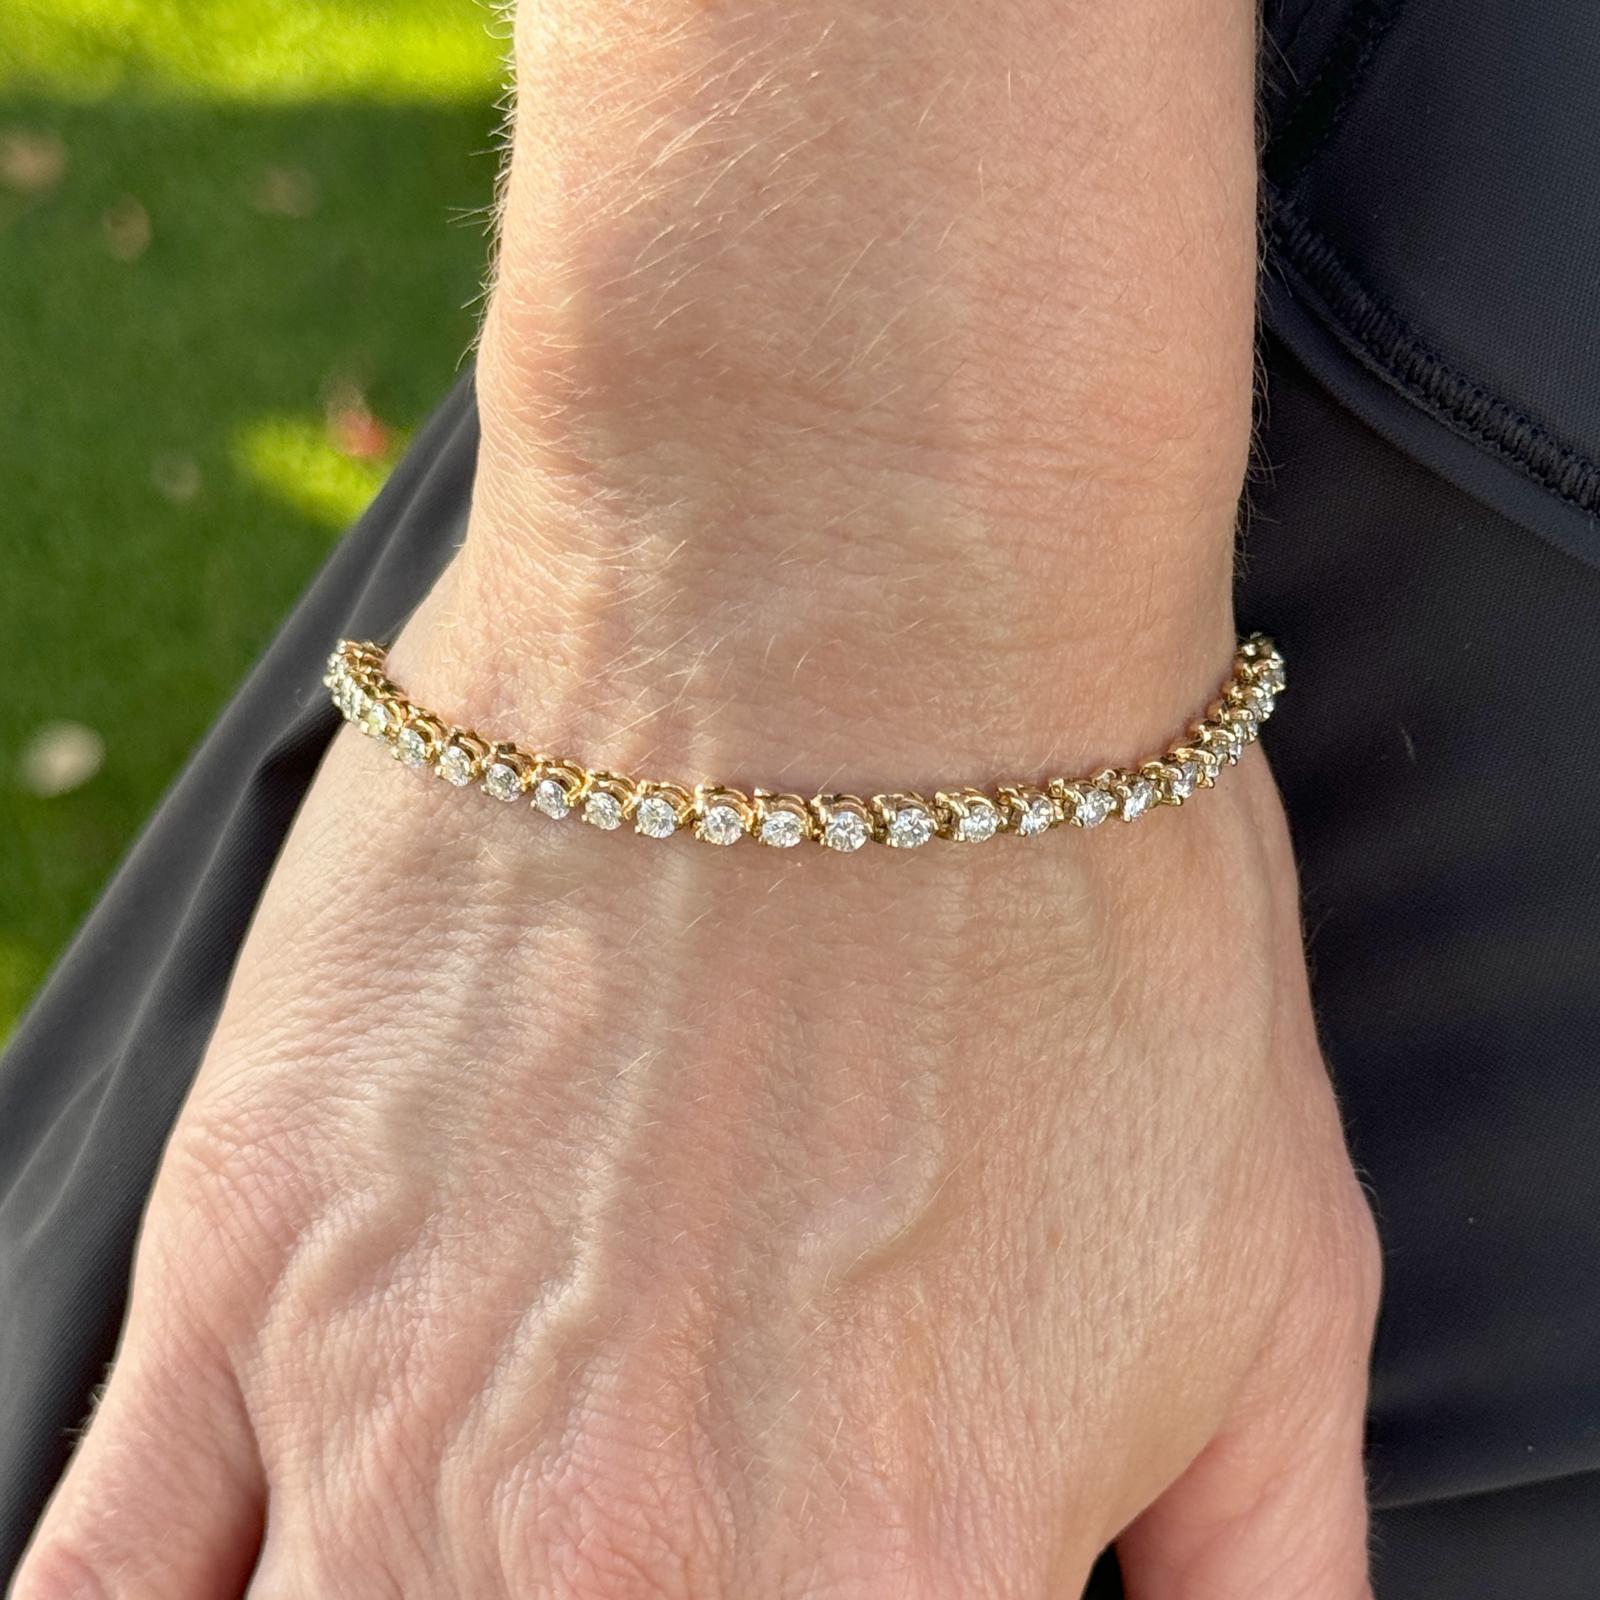 Diamond tennis bracelet fashioned in a 14 karat yellow gold setting. The 45 diamonds are round brilliant cuts, chosen for their exceptional sparkle and brilliance. The prong setting securely holds each diamond in place while allowing maximum light